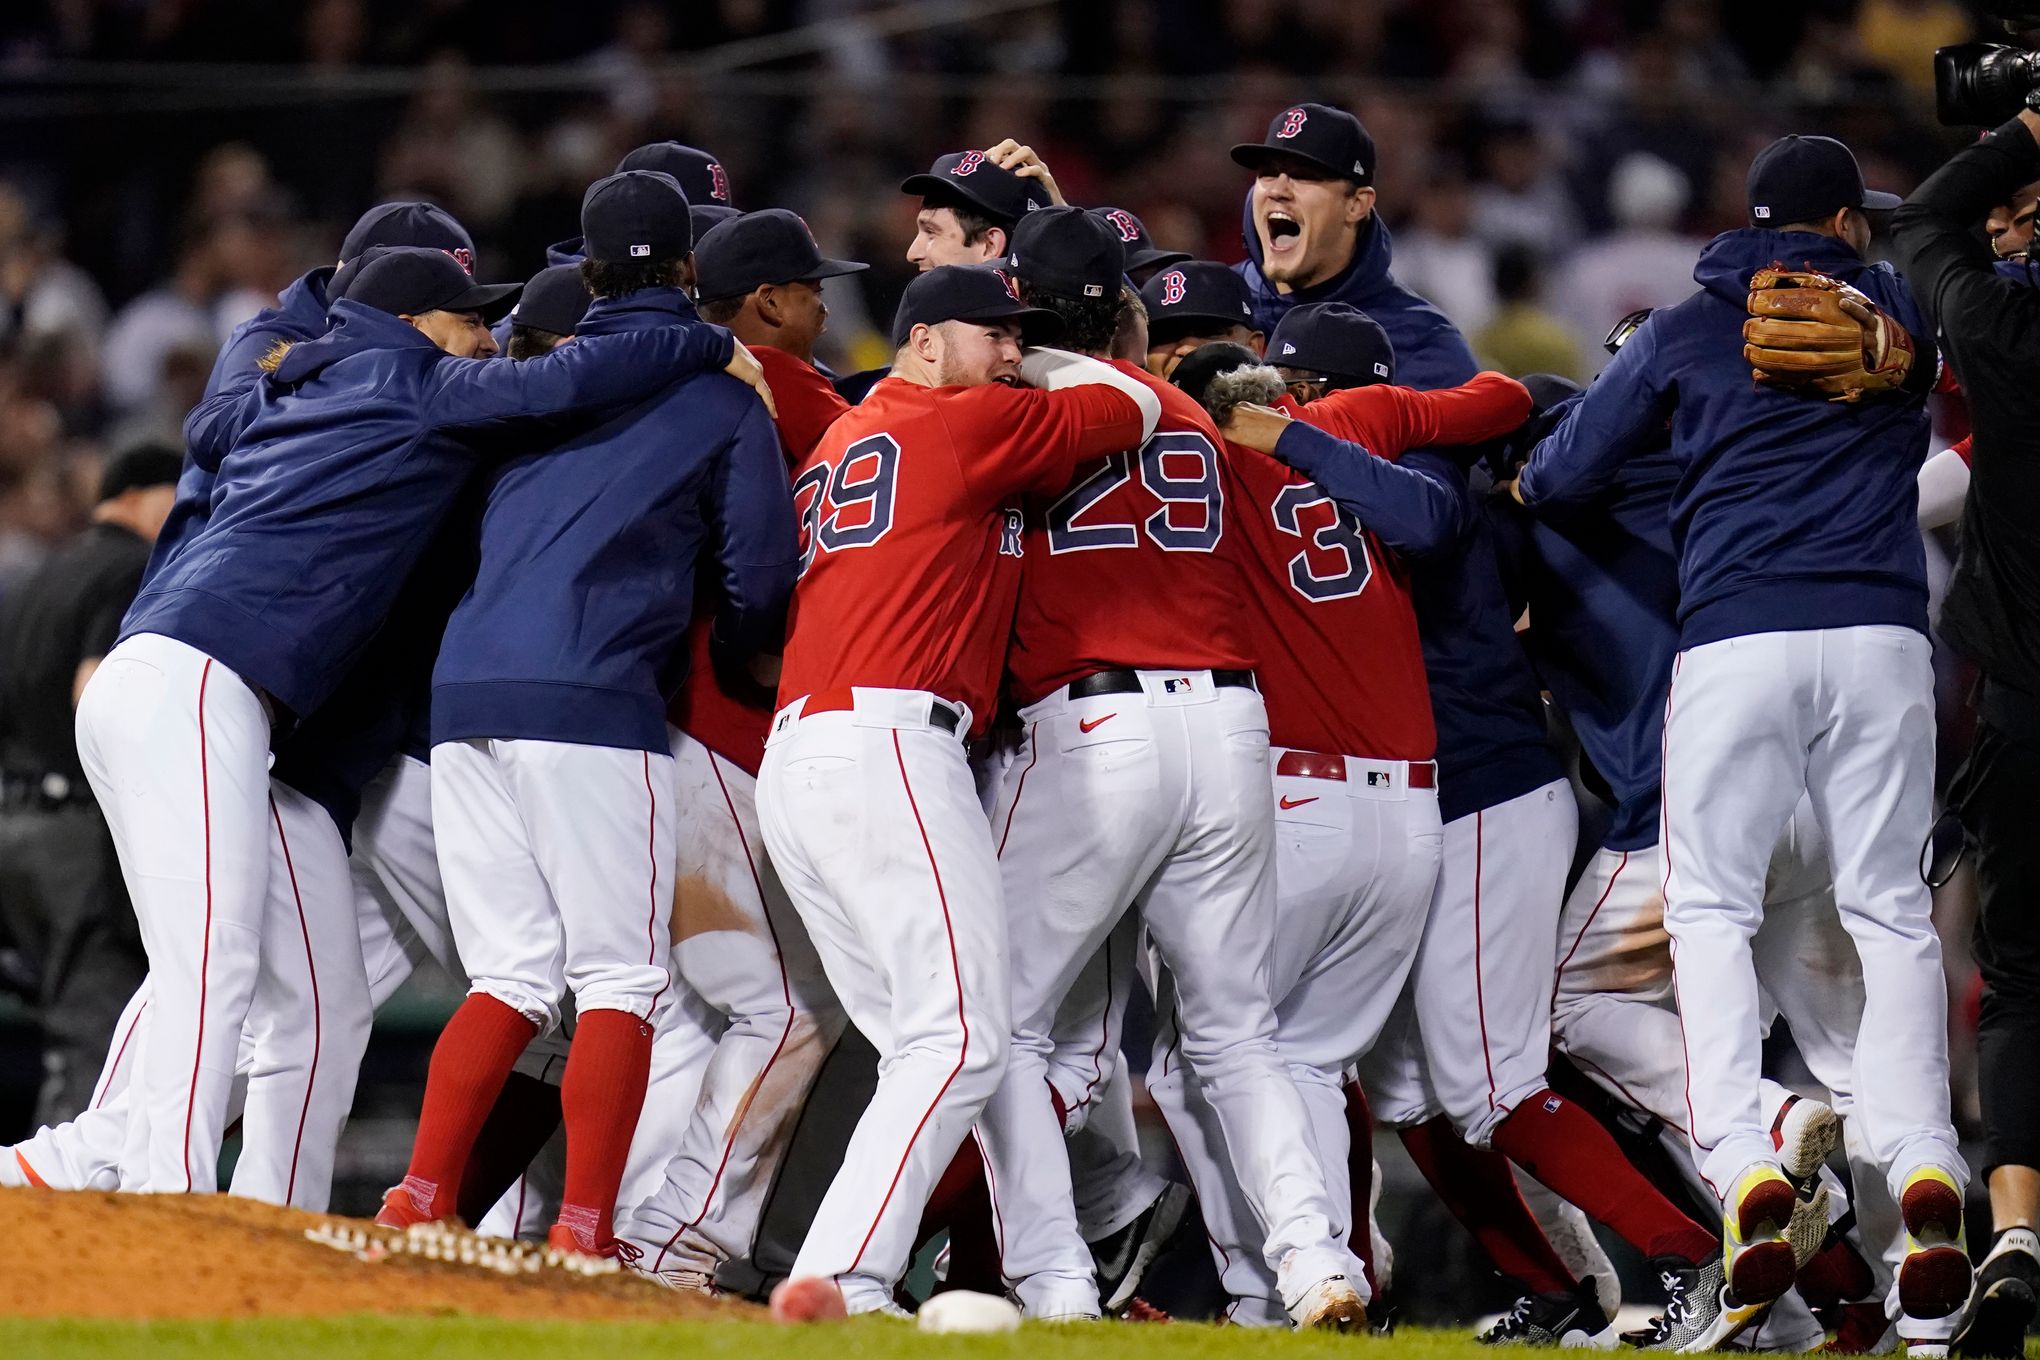 On Opening Day, Red Sox walked before they ran in 10-9 loss